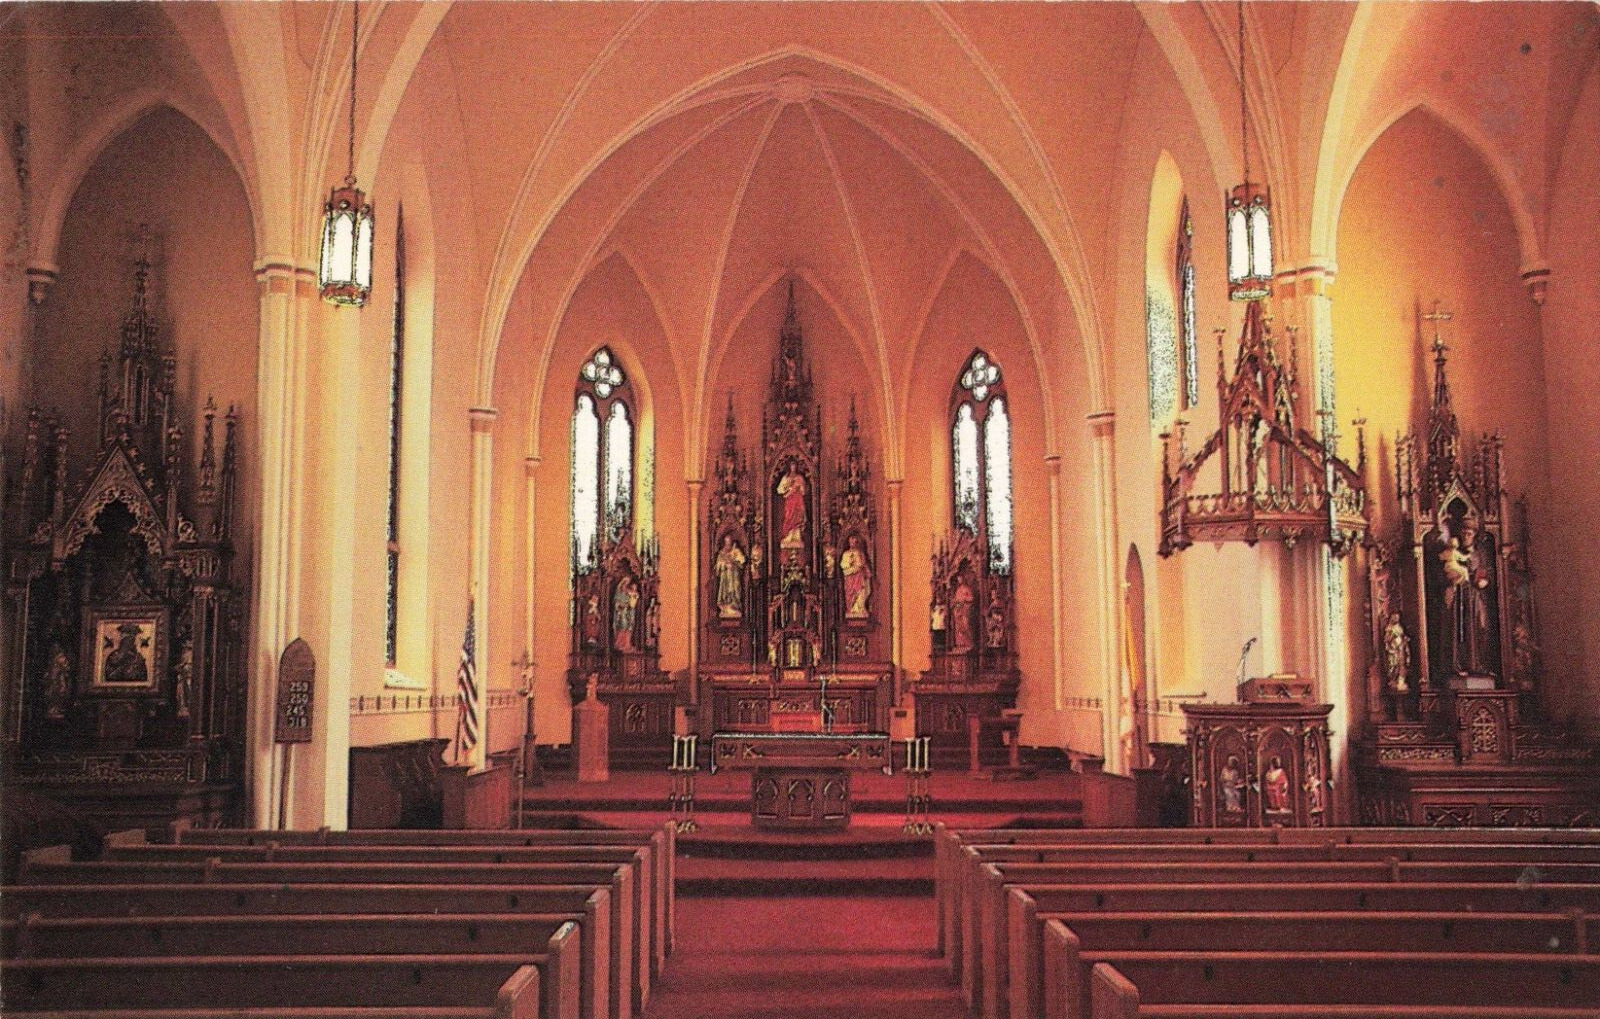 Wien MO Missouri, St. Mary of the Angels Church Interior, Vintage Postcard